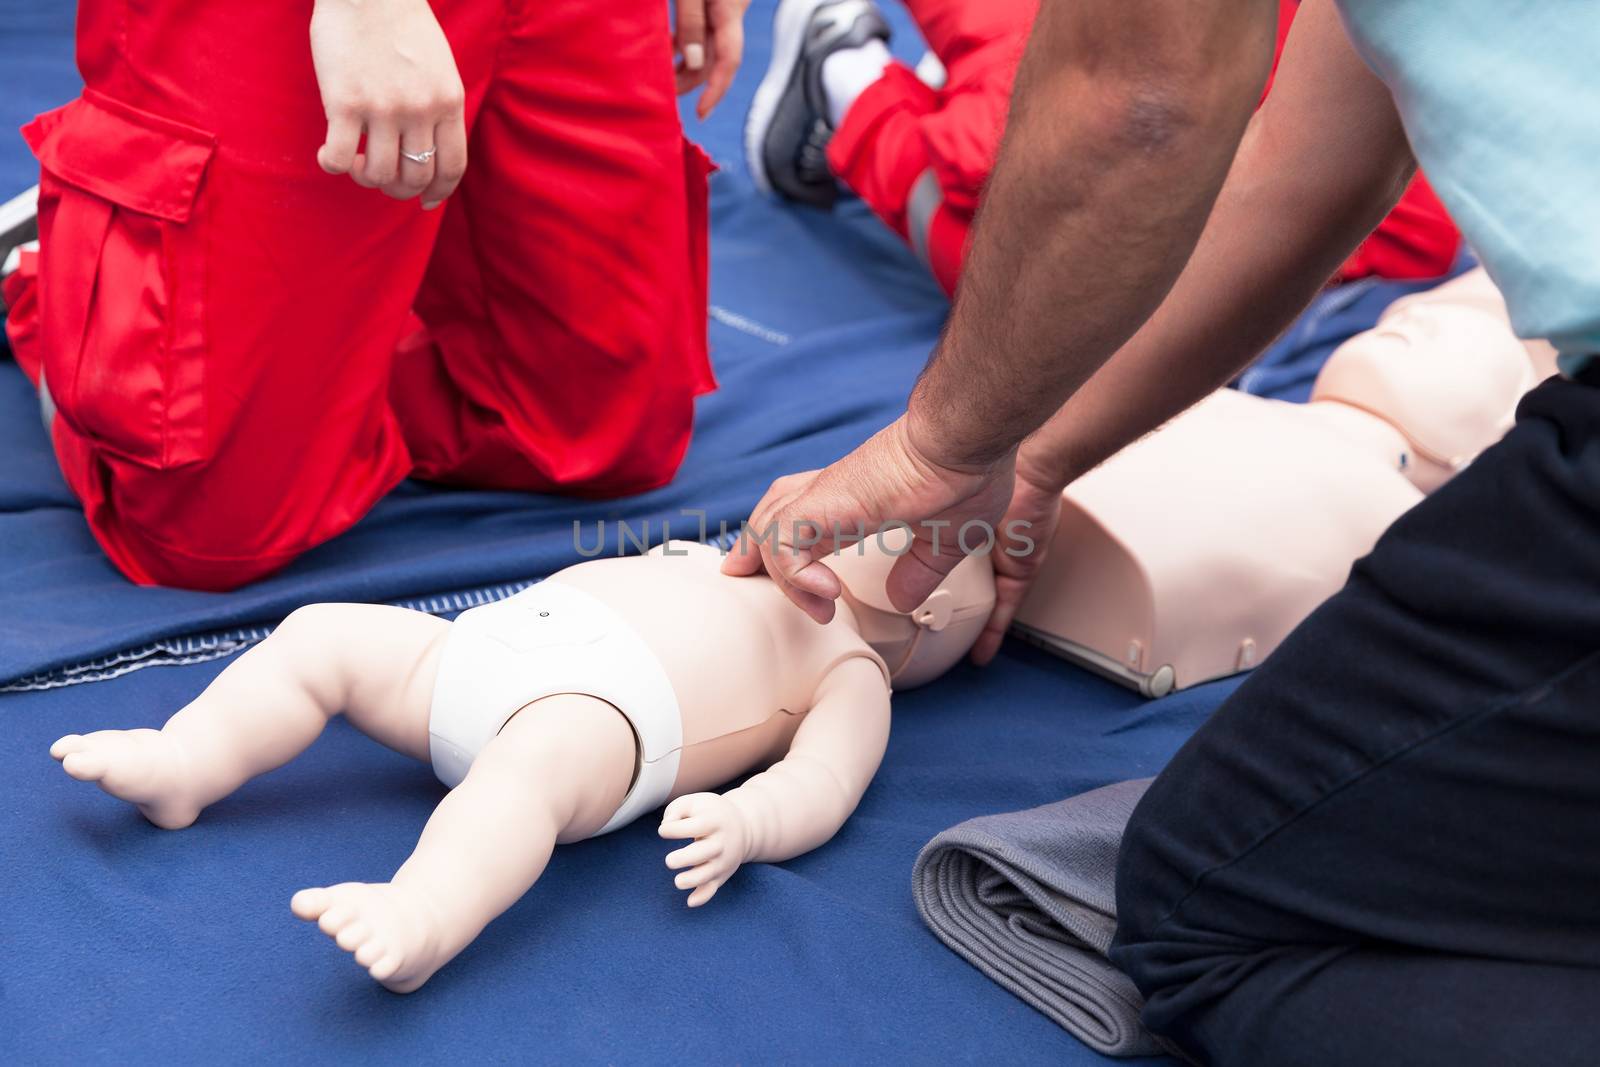 Cardiopulmonary resuscitation - CPR. Baby CPR dummy first aid training.